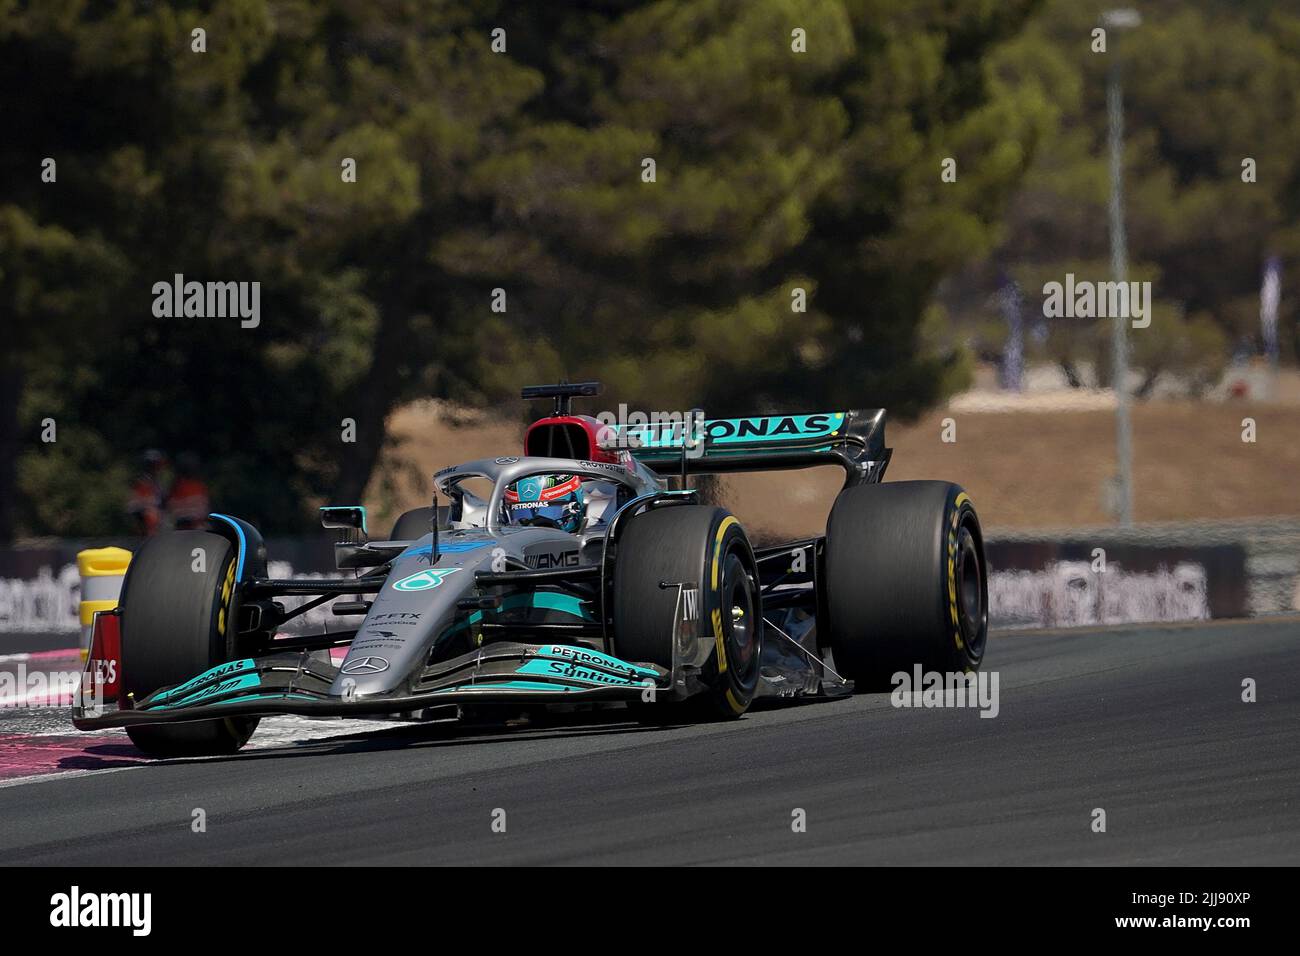 24 July 2022, France, Le Castellet: Motorsport: Formula 1 World Championship, French Grand Prix, race: George Russell from Great Britain of Team Mercedes drives on the track. Photo: Hasan Bratic/dpa Stock Photo